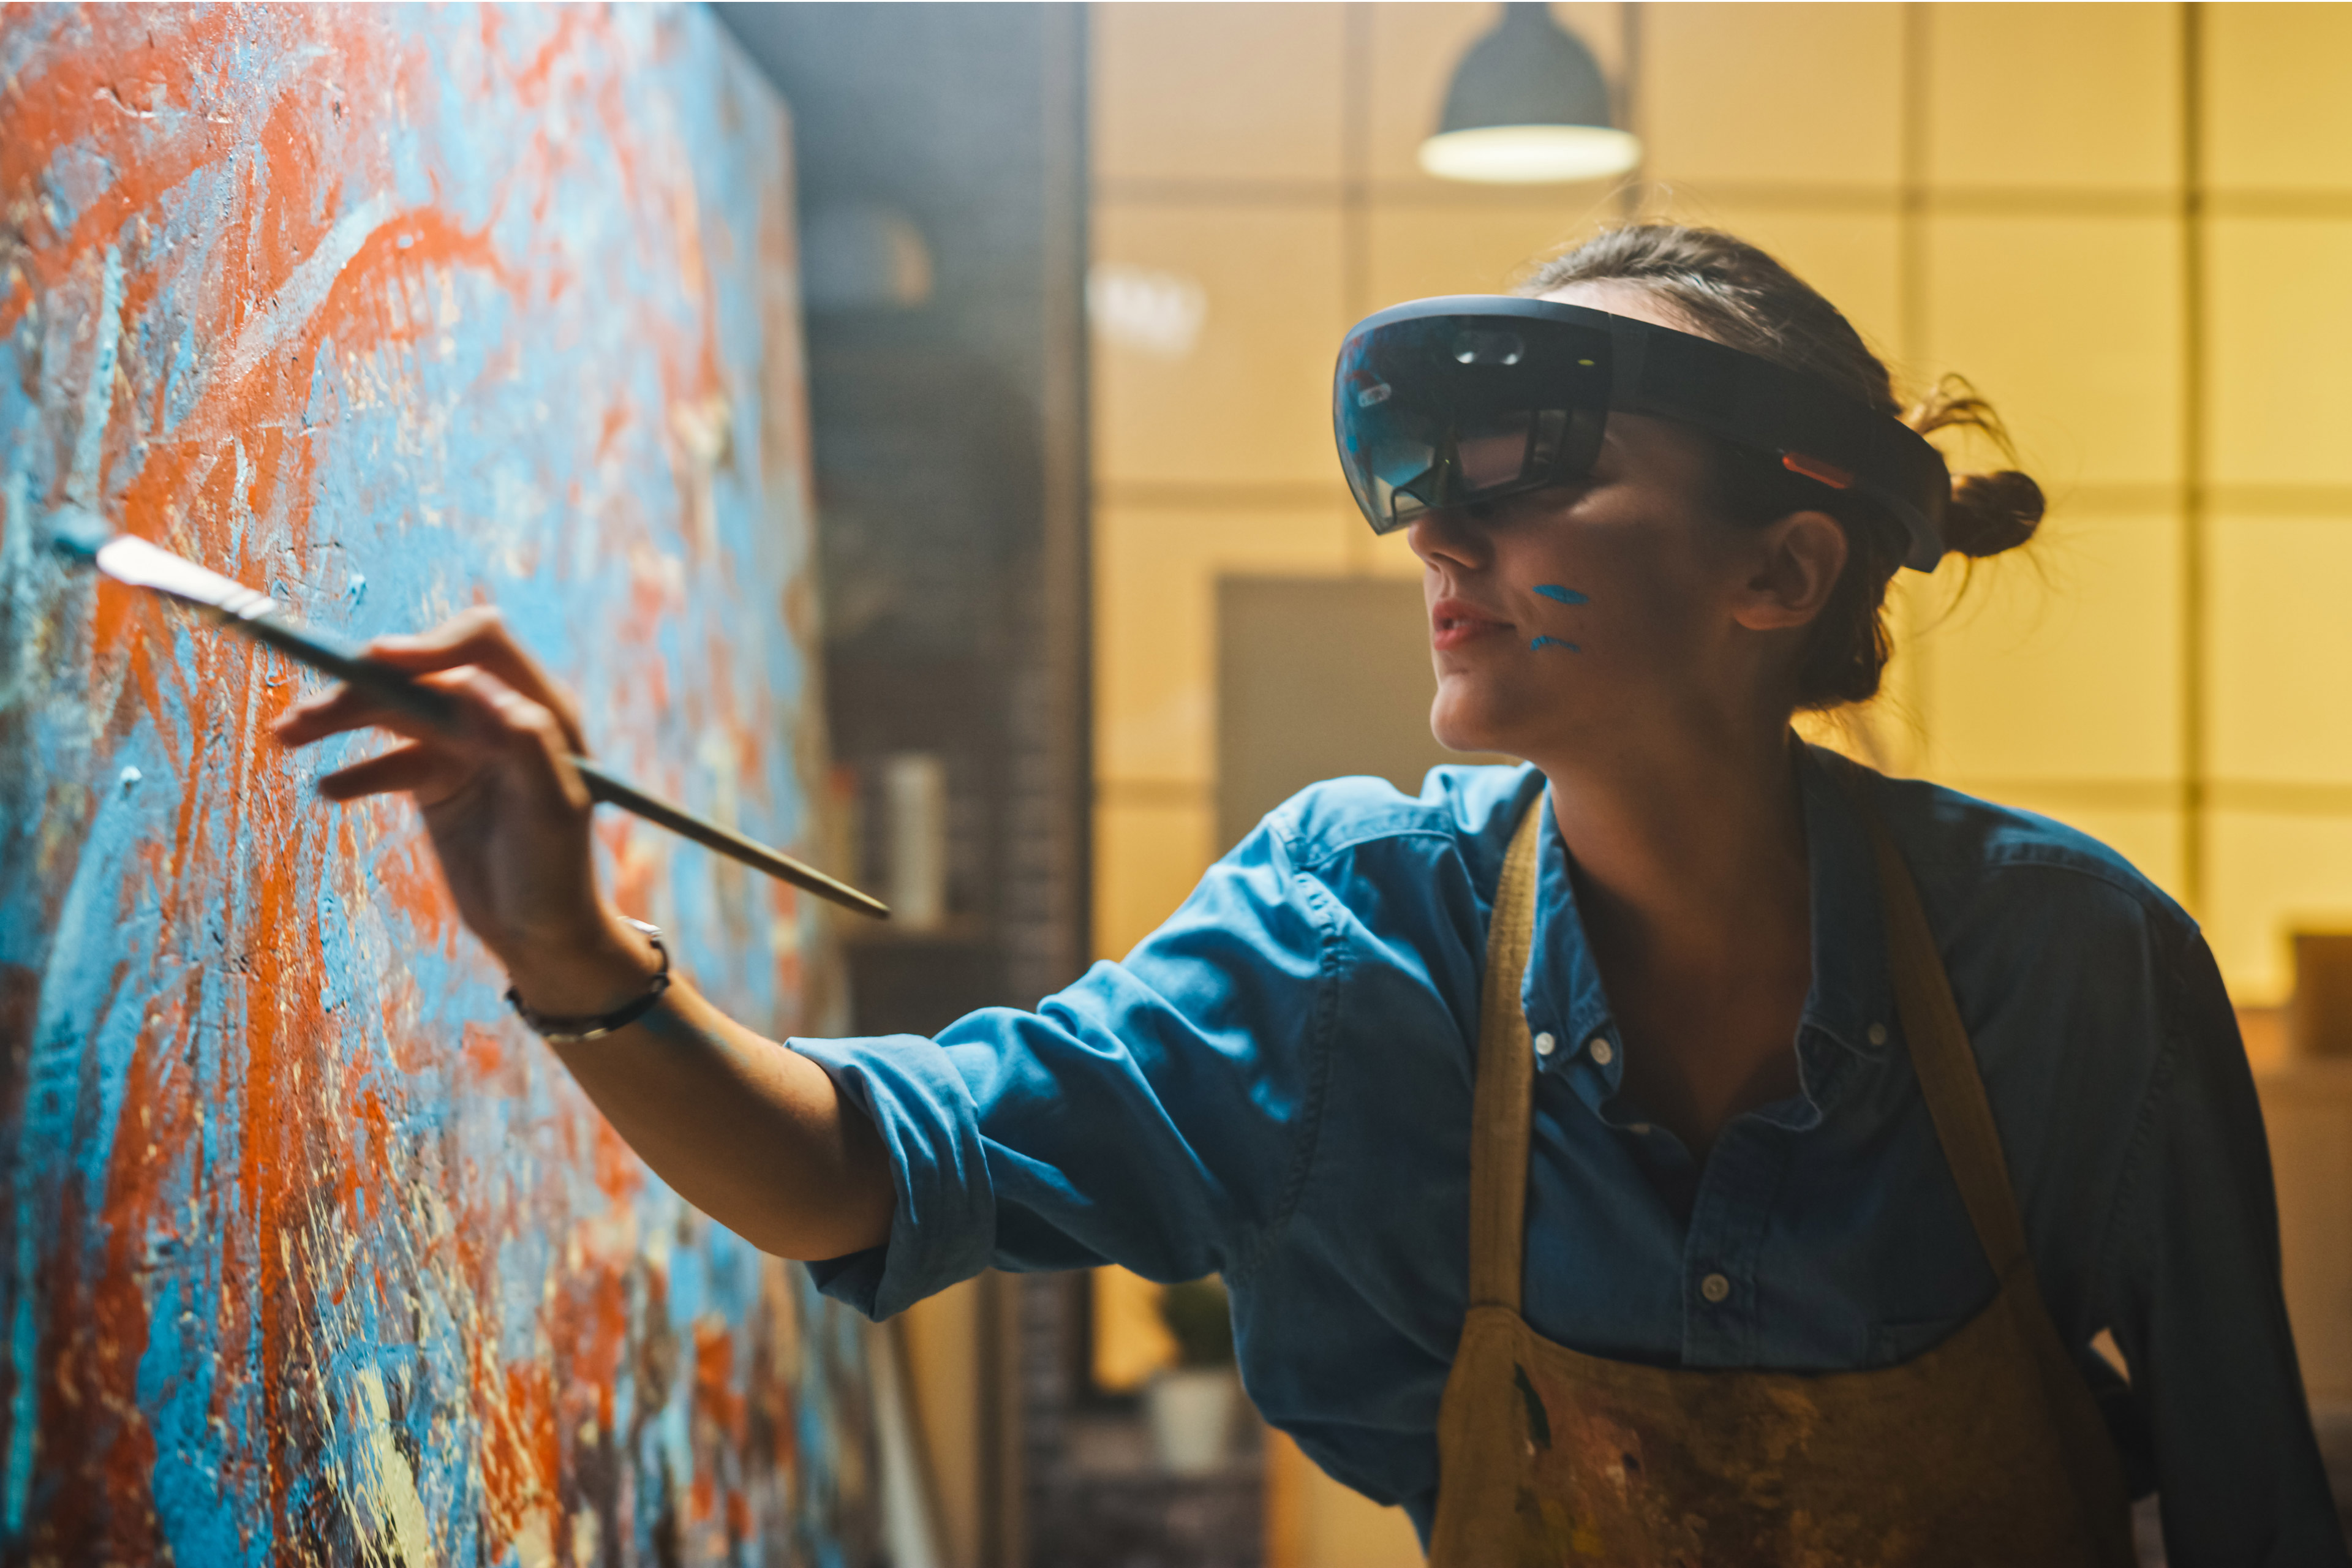 women wearing ar headset painting on wall